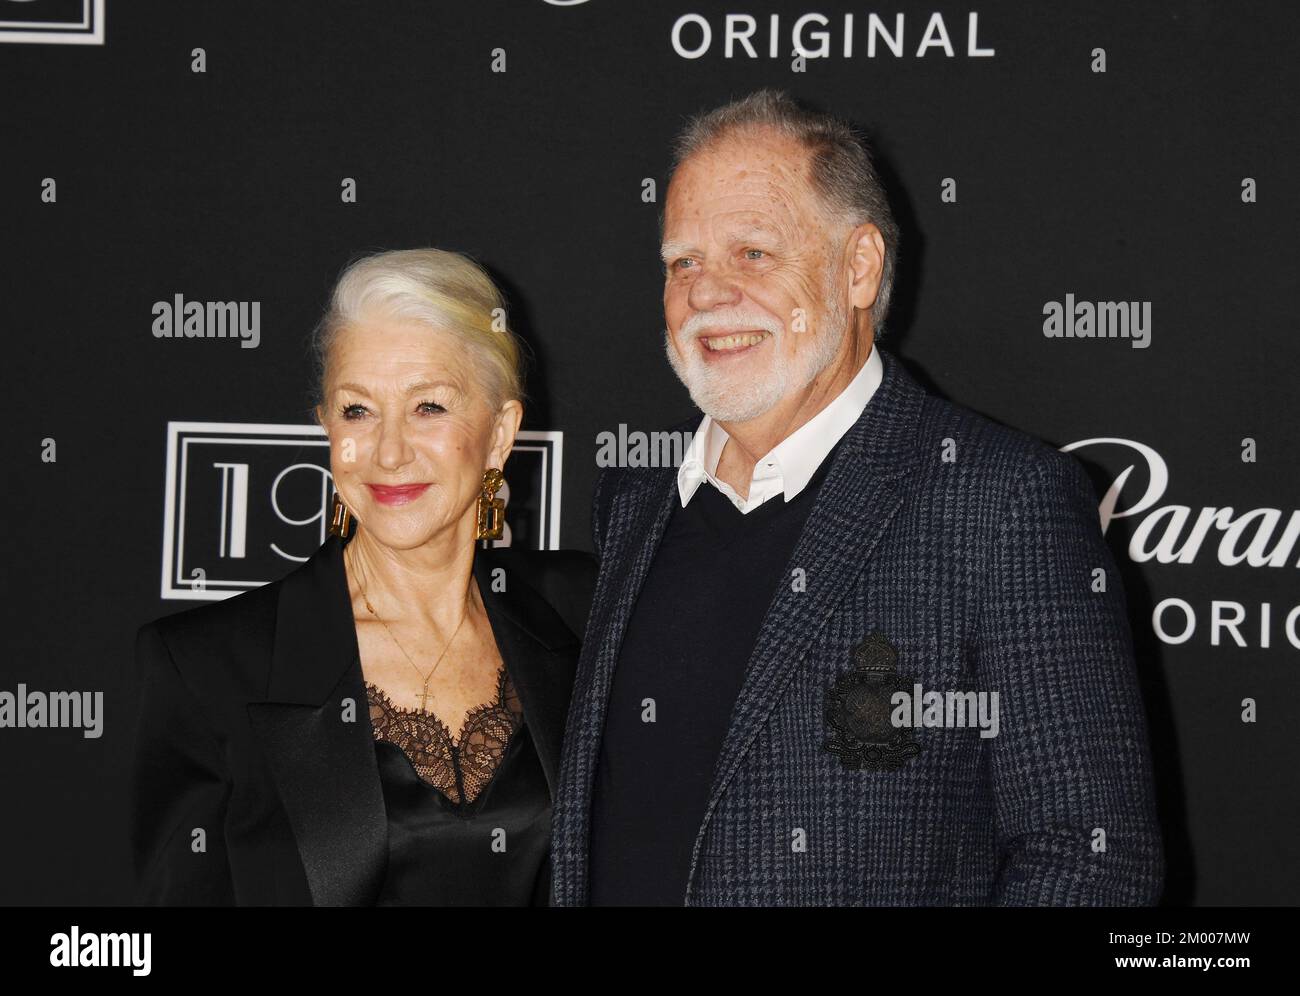 LOS ANGELES, CALIFORNIA - DECEMBER 02: (L-R) Helen Mirren and Taylor Hackford attend the Los Angeles Premiere Of Paramount+'s '1923' at Hollywood Amer Stock Photo